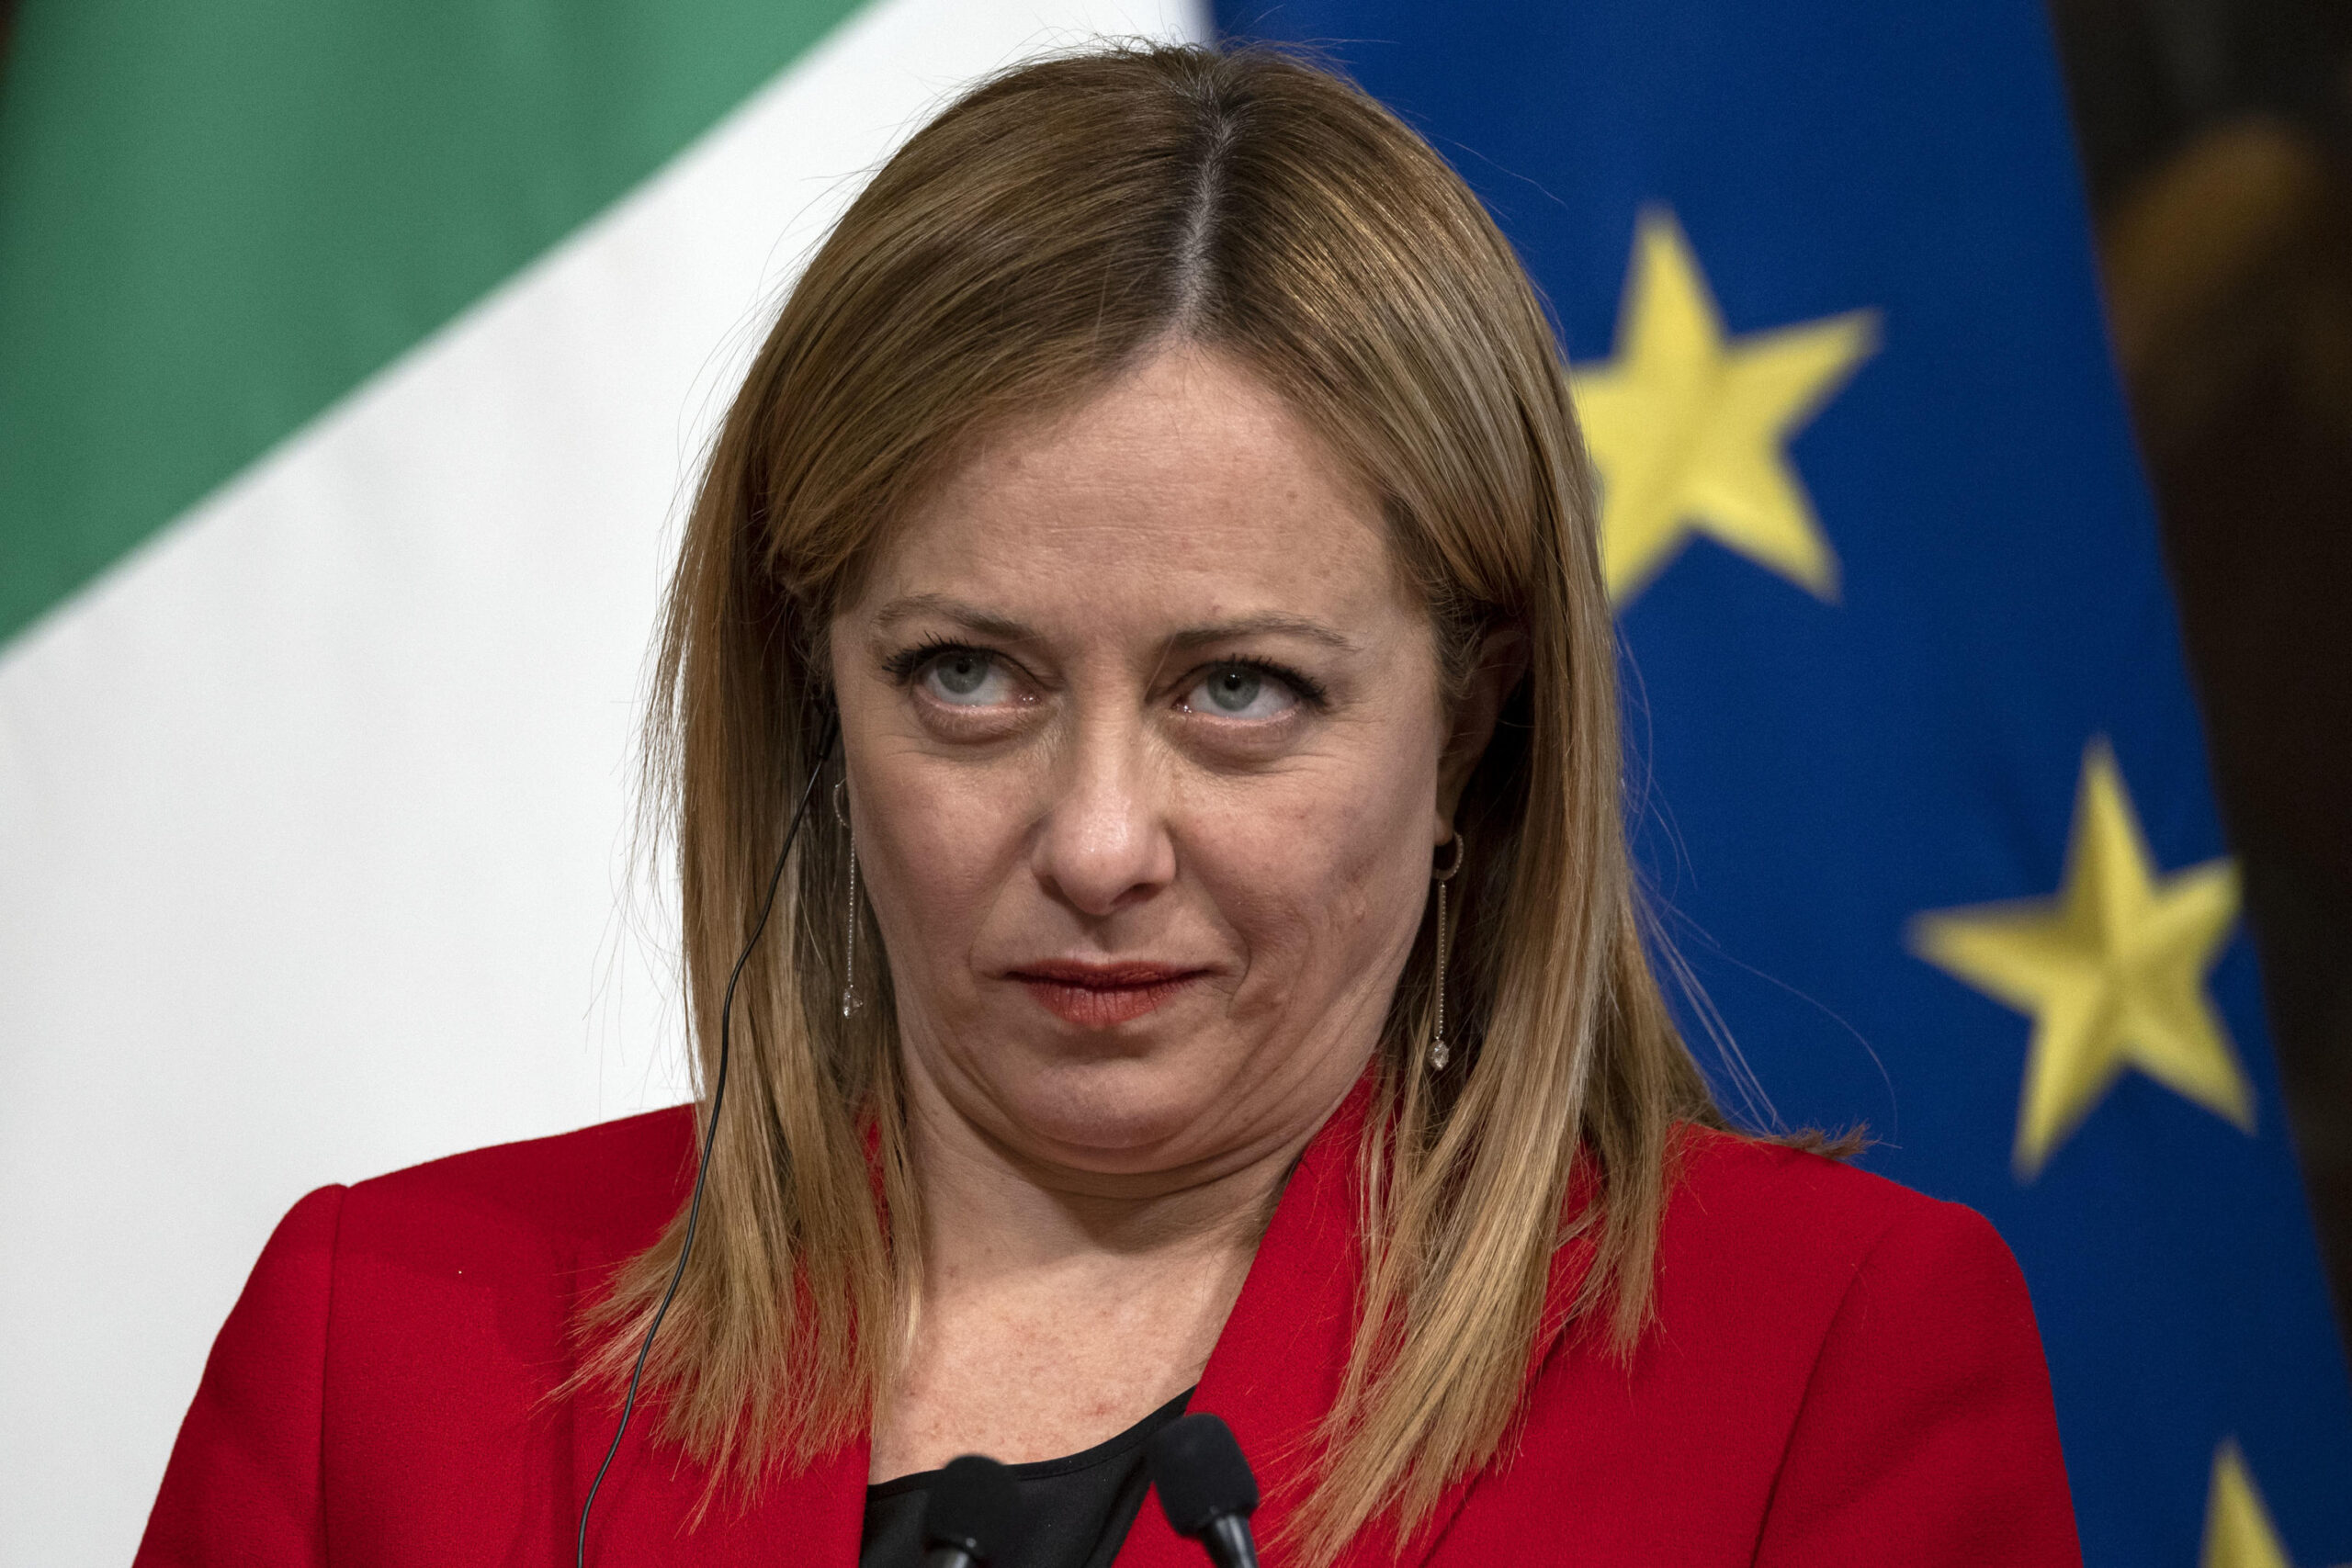 Prime Minister Giorgia Meloni at the end of the meeting with the Nobel Peace Prize laureate, Ethiopia's Prime Minister Abiy Ahmed Ali attends a press conference at Chigi Palace in Rome, Italy, 06 February 2023
ANSA/MASSIMO PERCOSSI